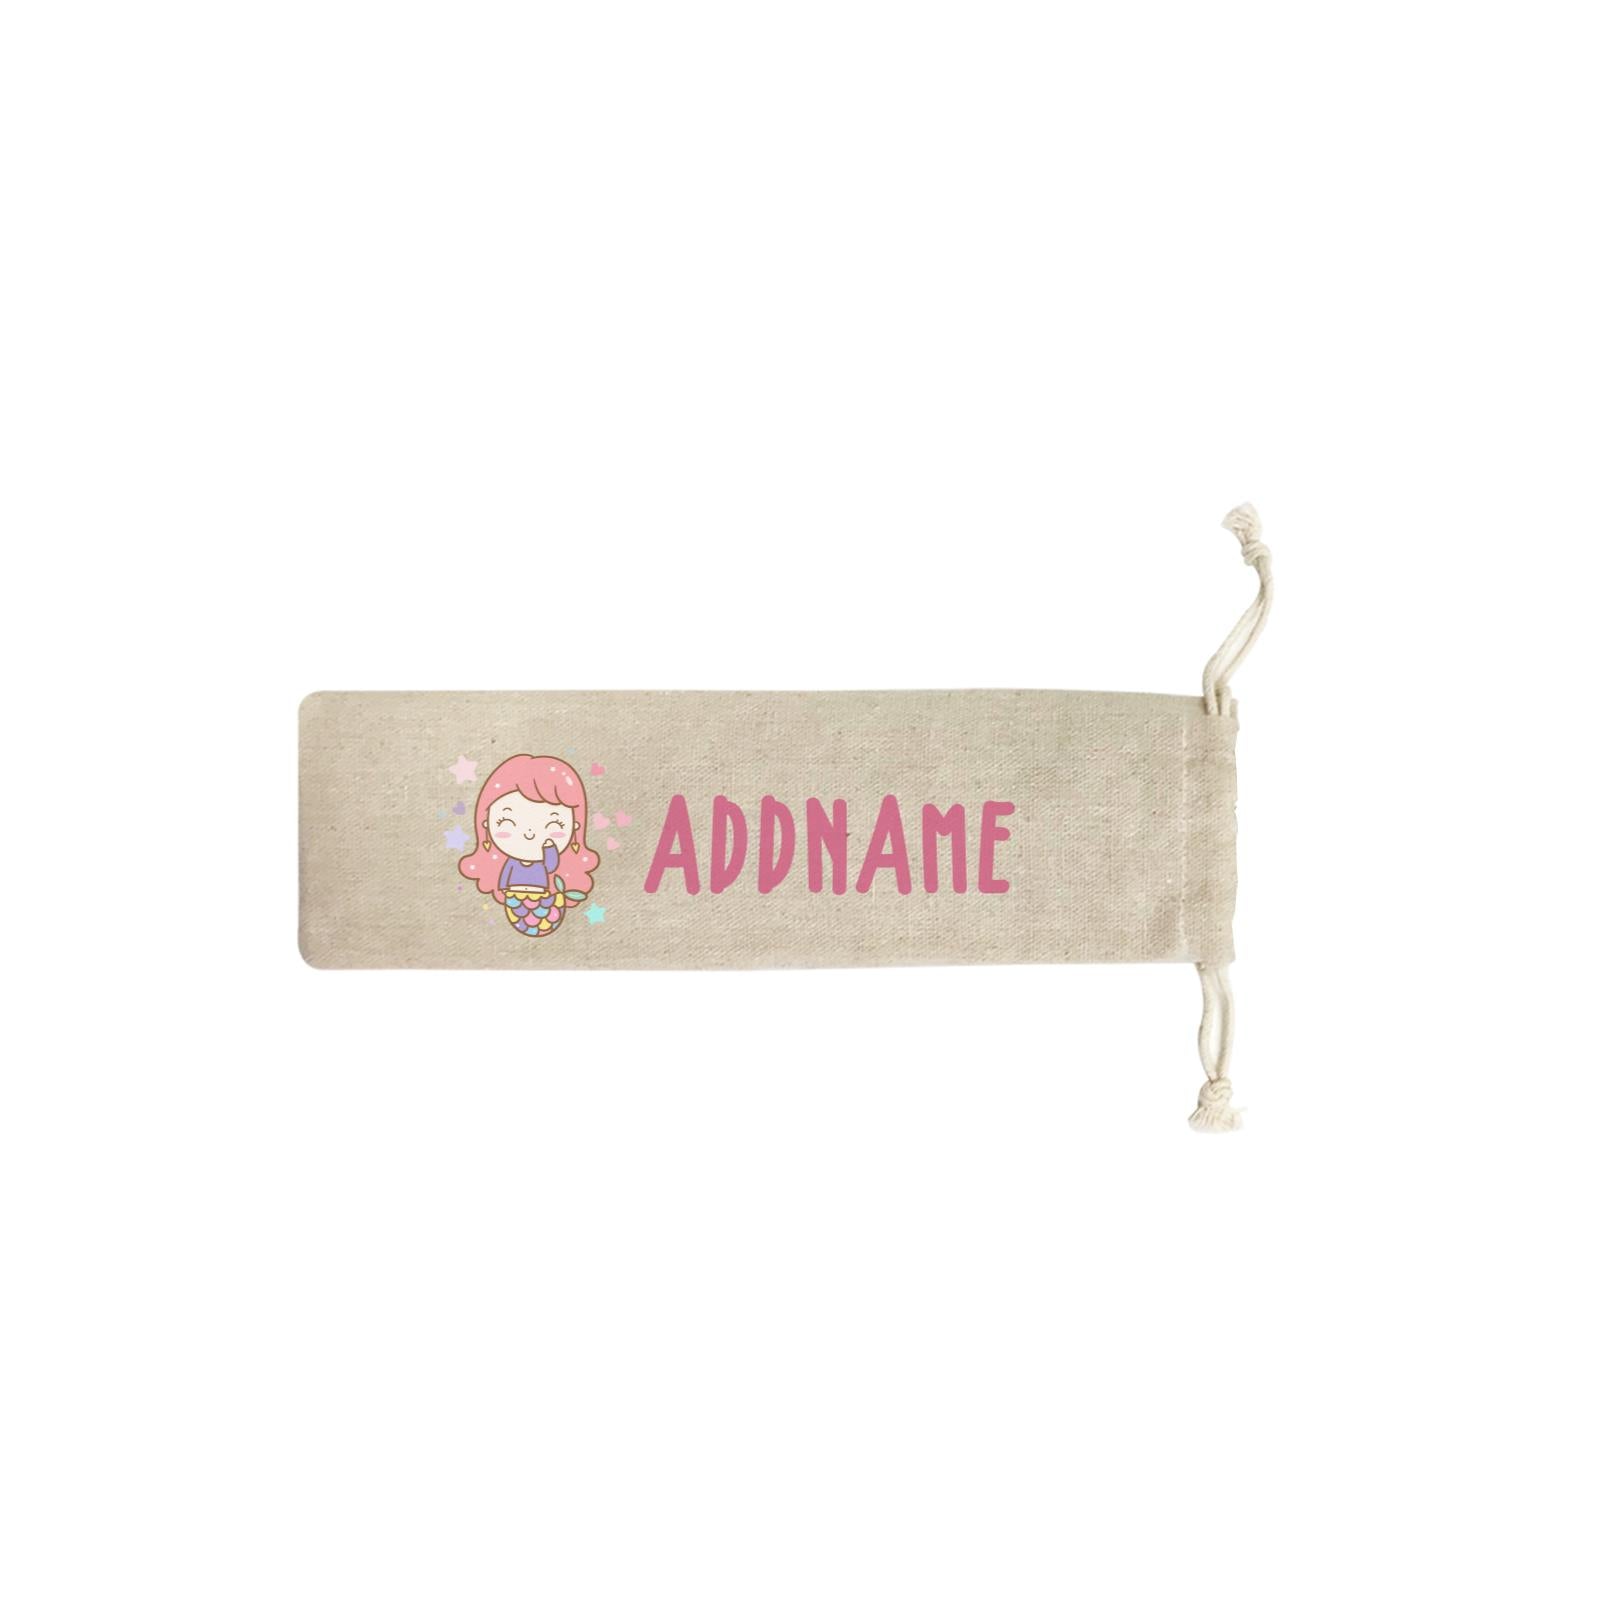 Unicorn And Princess Series Cute Happy Waving Mermaid Girl Addname SB Straw Pouch (No Straws included)